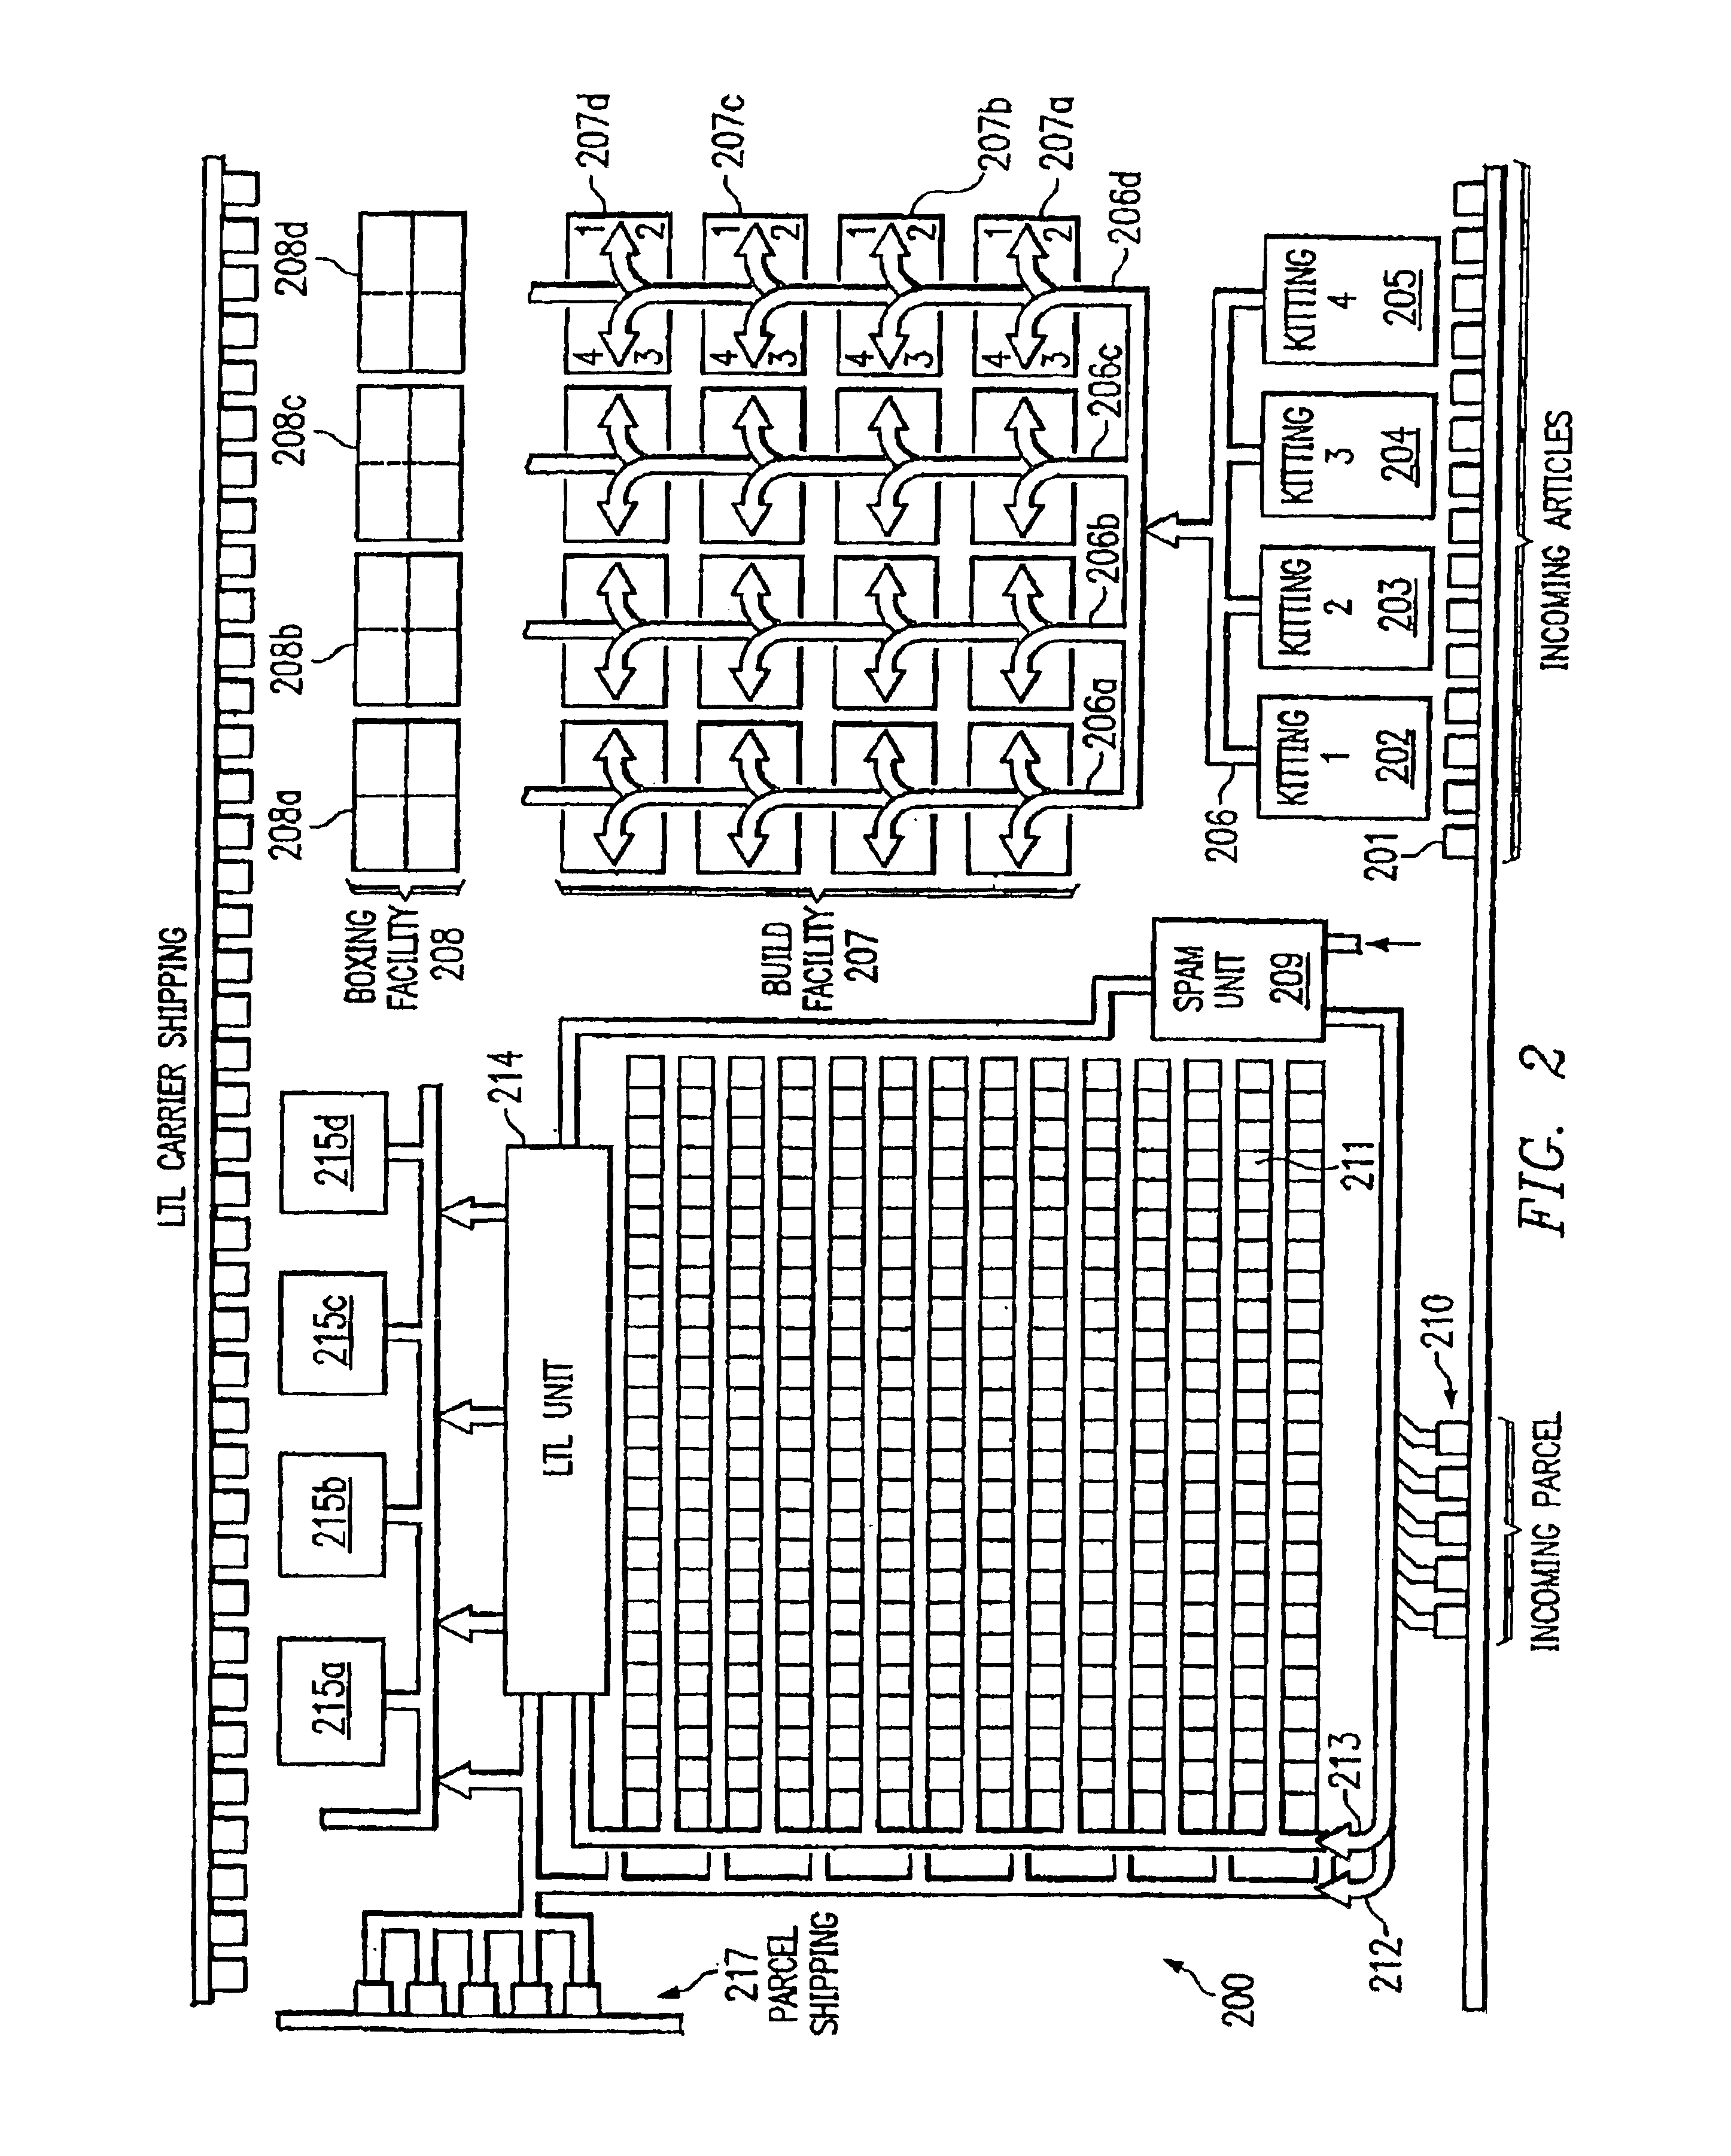 Method and system for monitoring resources within a manufacturing environment